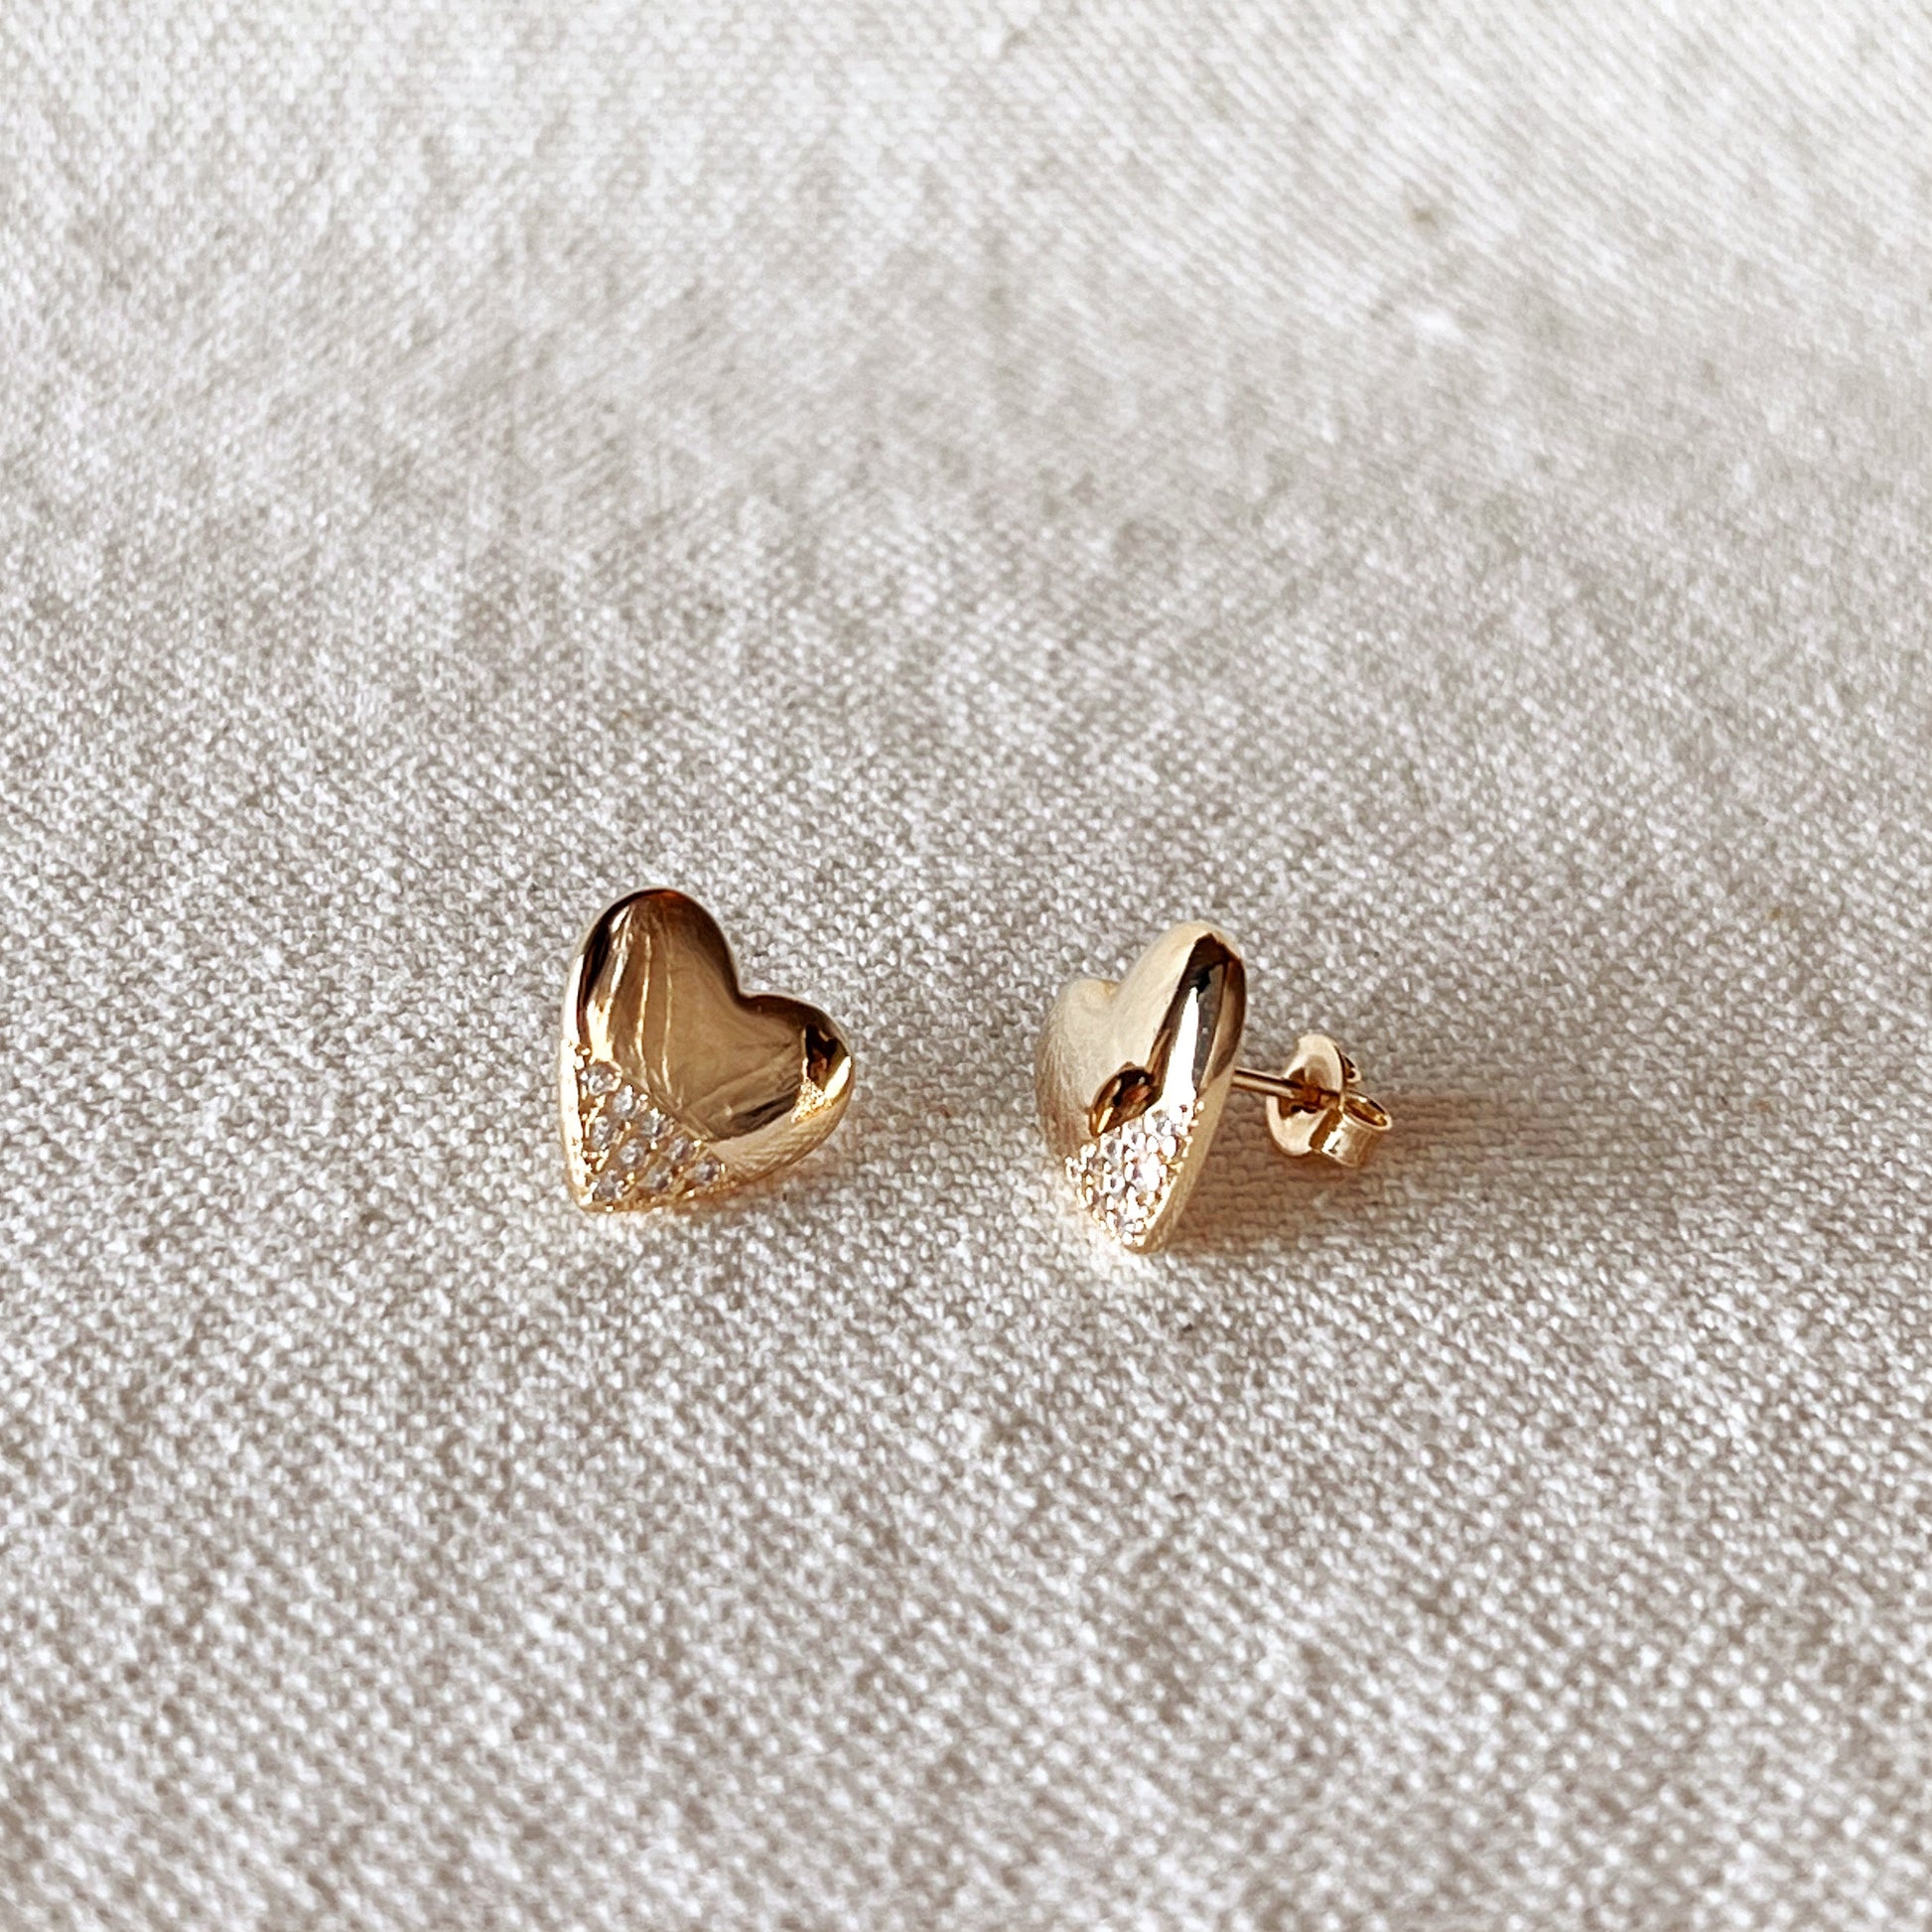 GoldFi 18k Gold Filled Heart Stud Earrings with Cubic Zirconia Stones